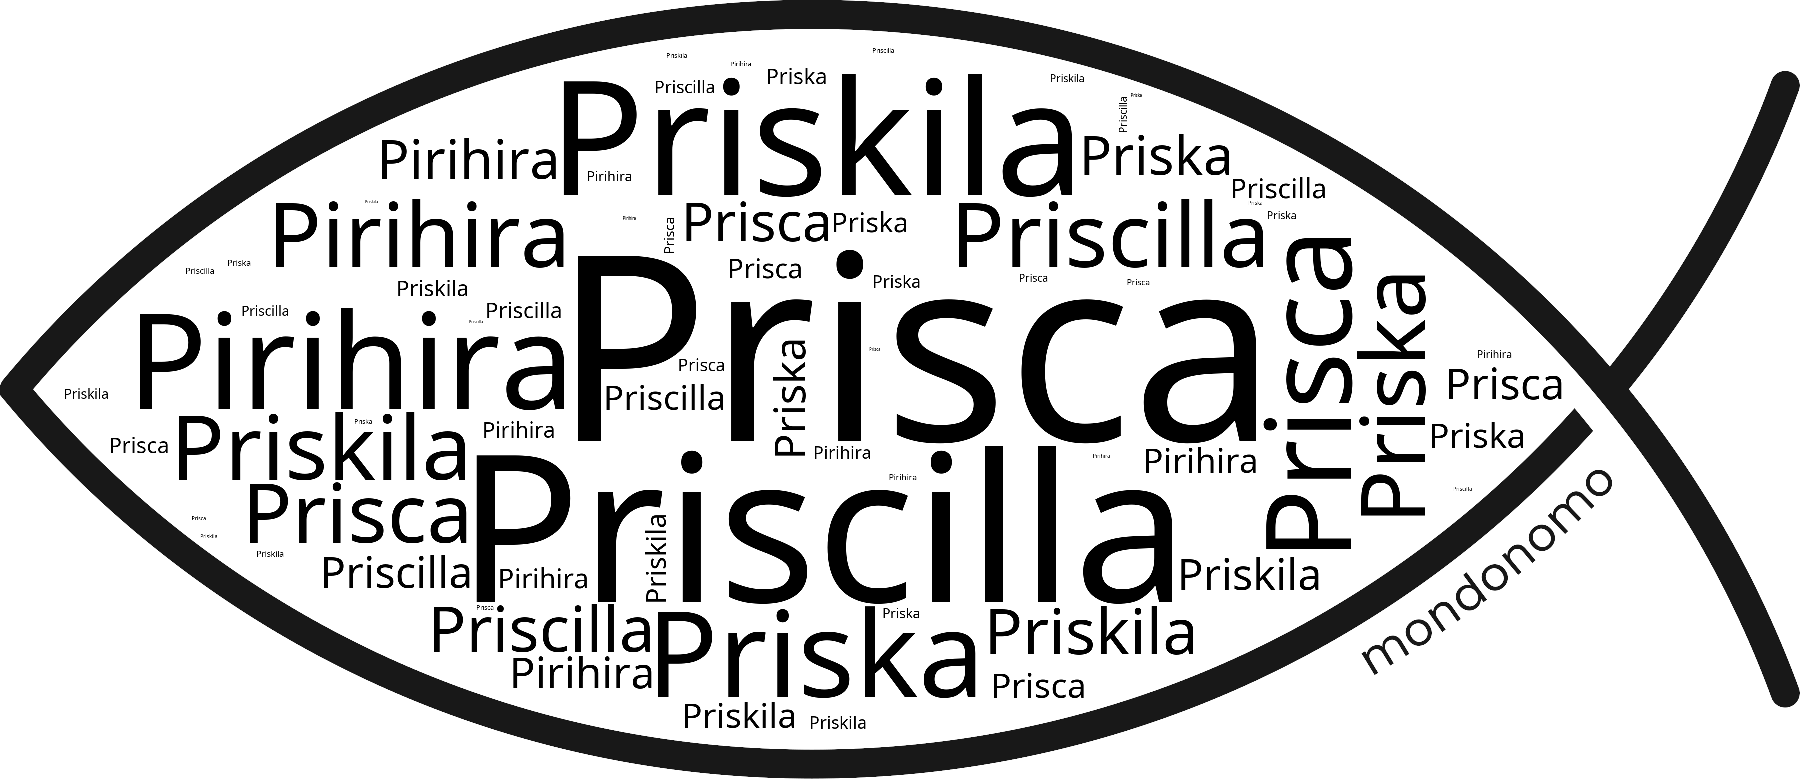 Name Prisca in the world's Bibles